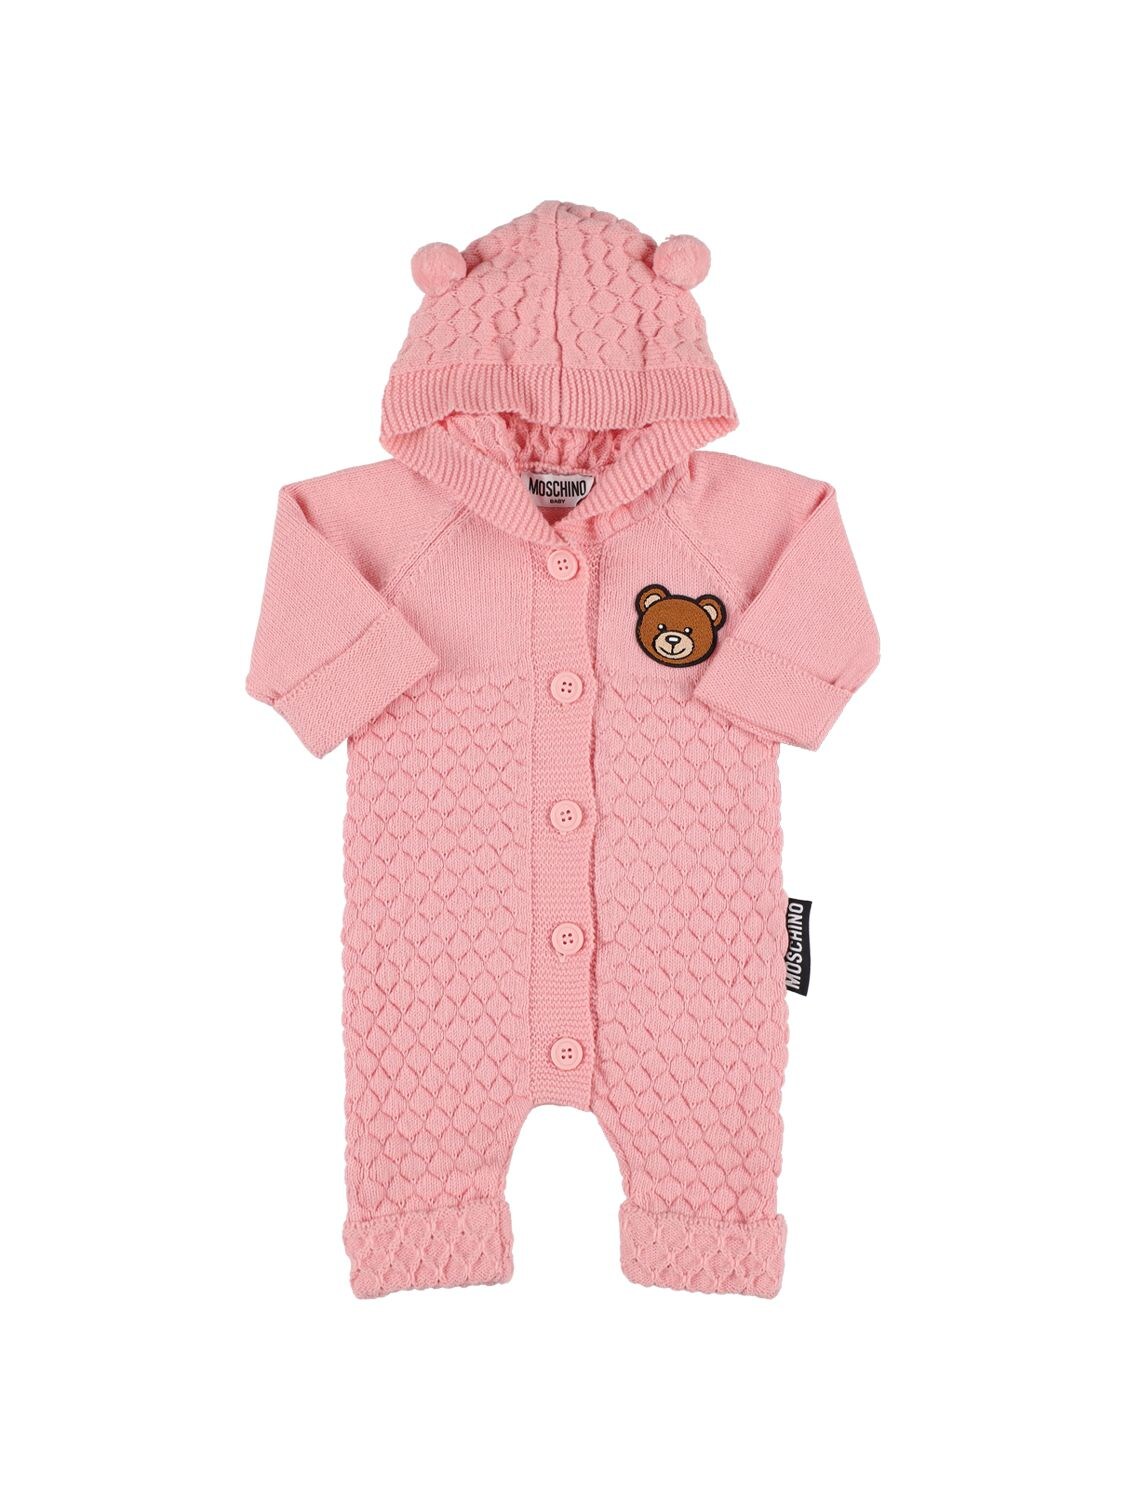 Moschino Babies' Toy Patch Wool & Cotton Knit Romper In Pink